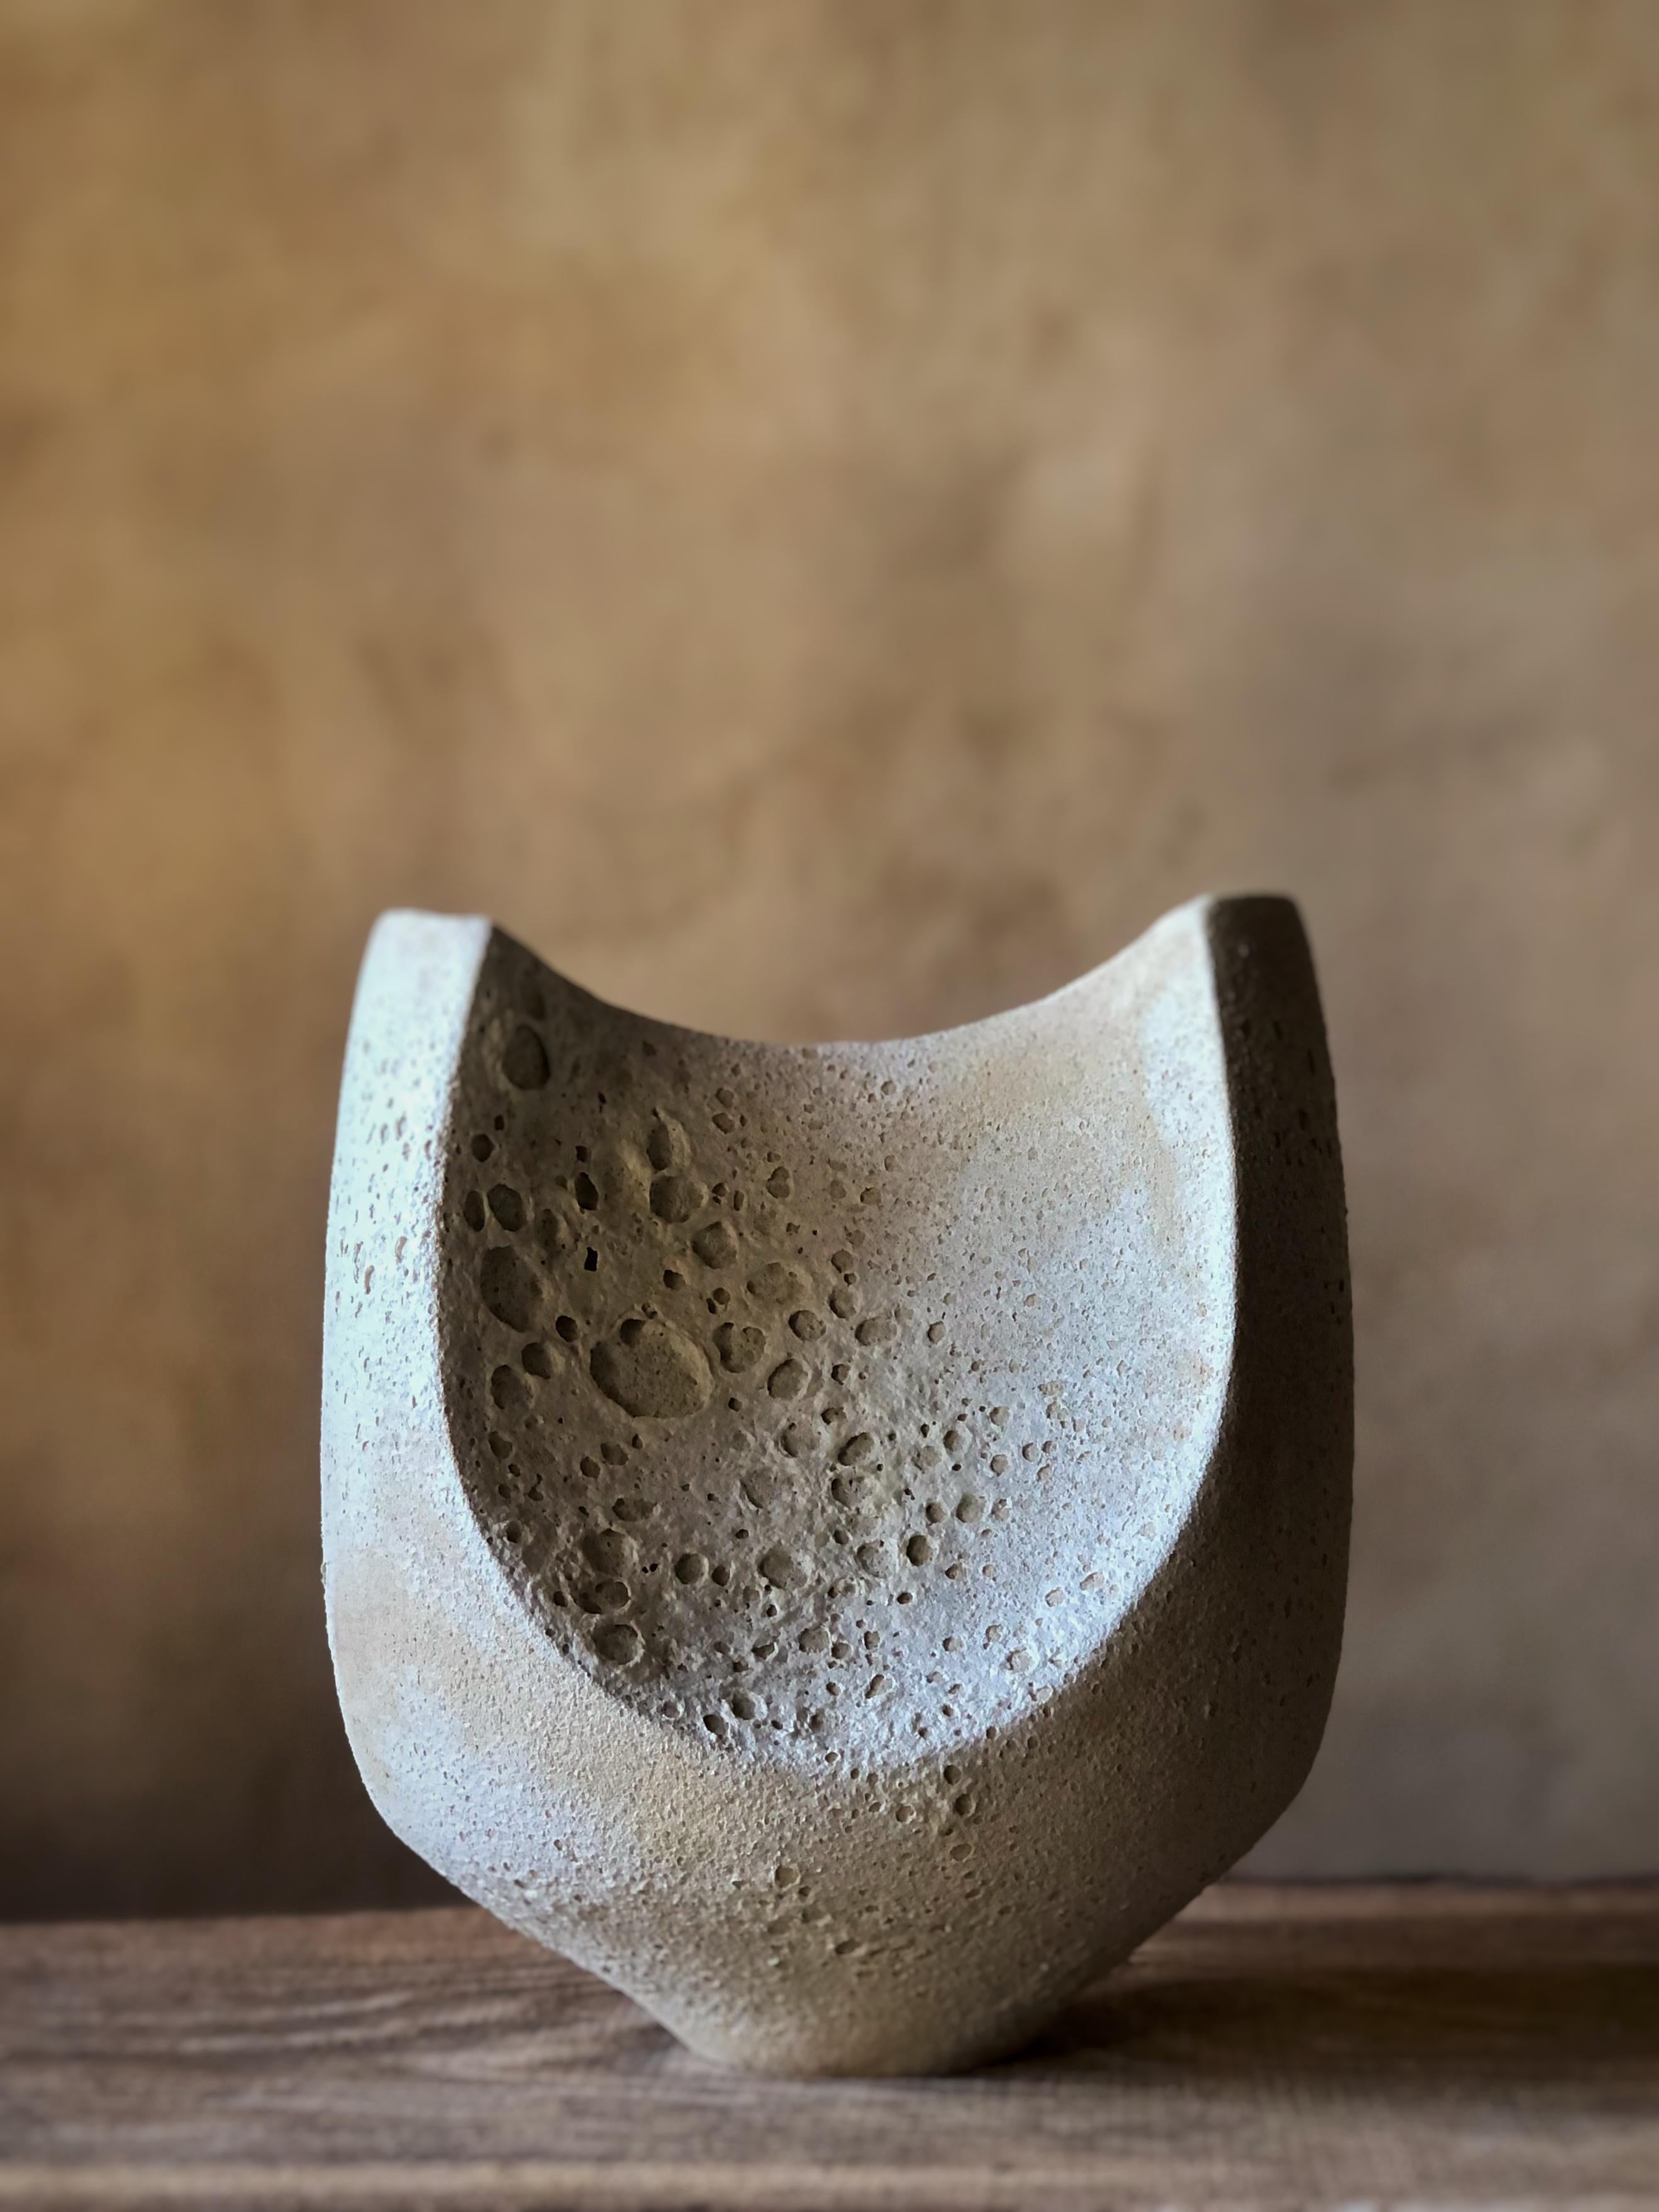 2 Facetted Vase With White Crackle Glaze by Sophie Vaidie
One Of A Kind.
Dimensions: D 10 x W 19 x H 23 cm. 
Materials: Stoneware with white crater glaze.

In the beginning, there was a need to make, with the hands, the touch, the senses. Then came